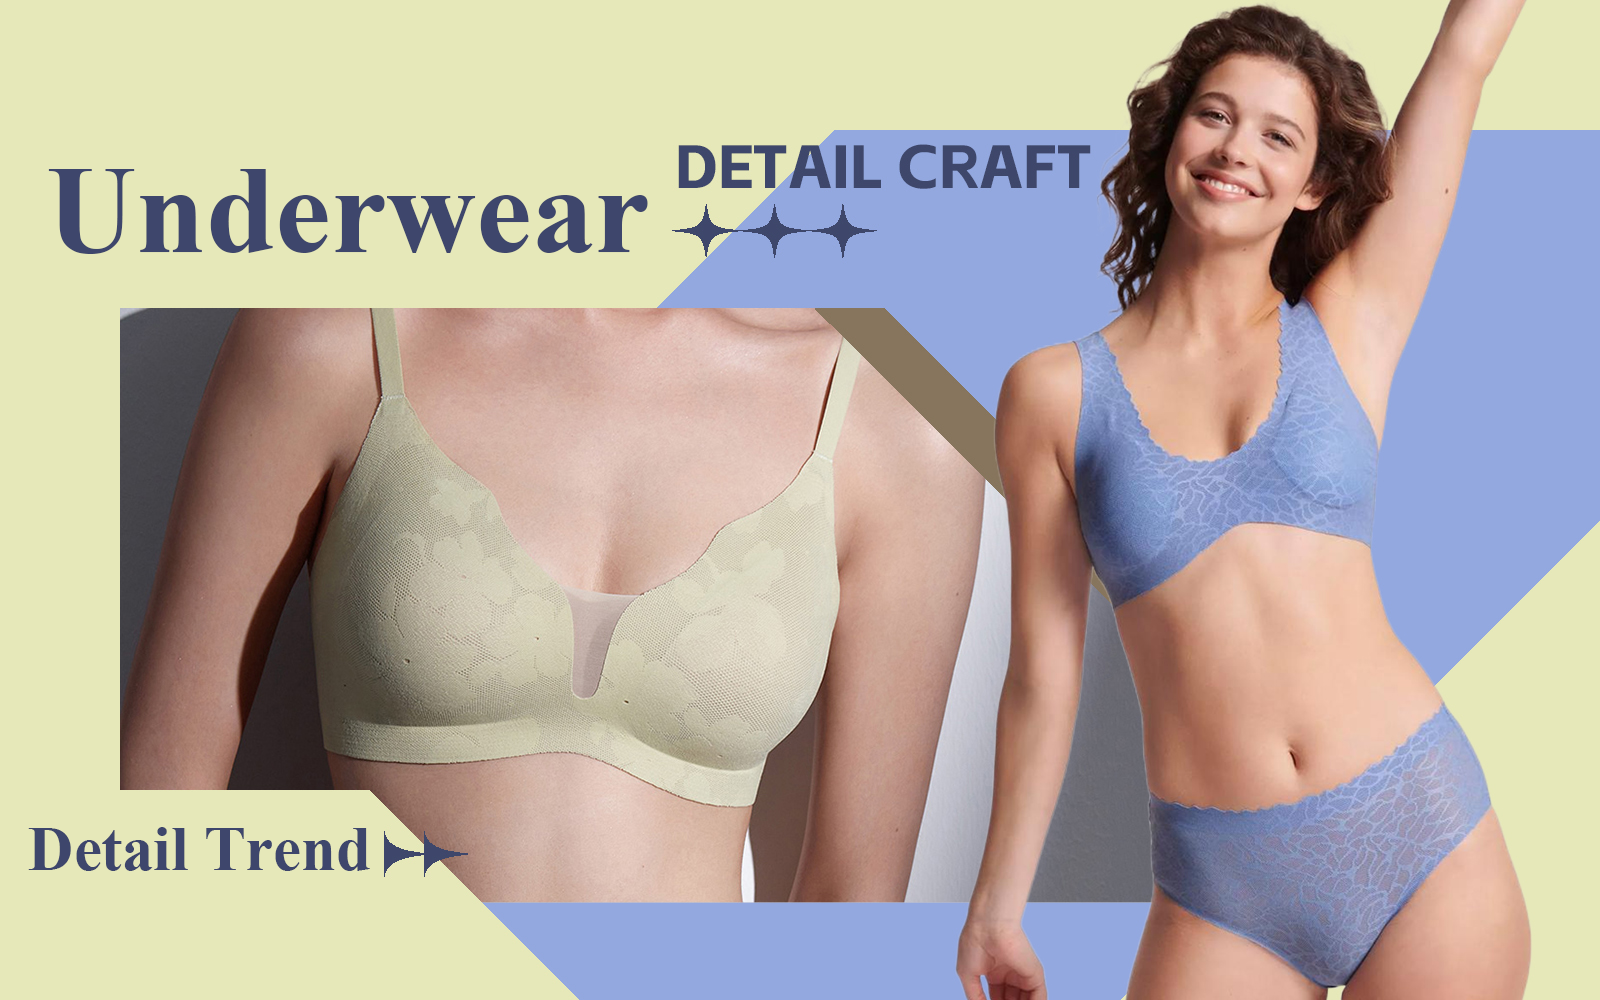 Comfortable & Traceless --- The Detail & Craft Trend for Women's Underwear